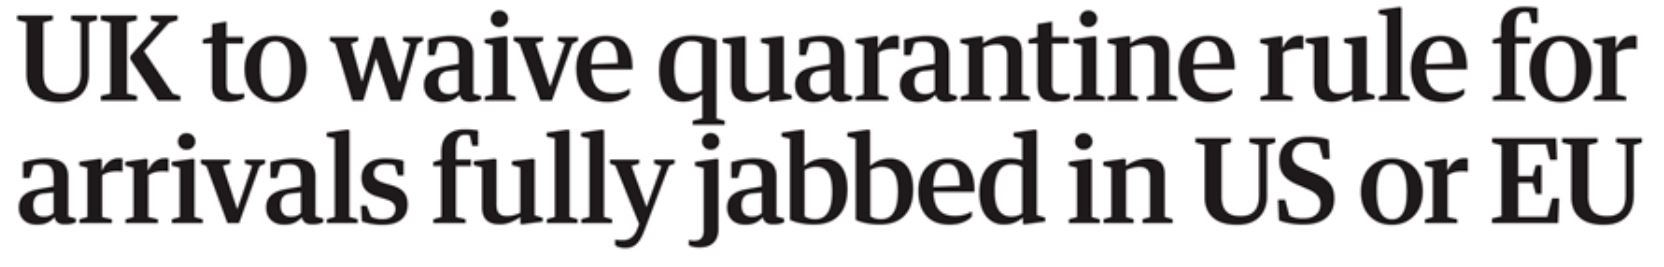 The Guardian new travel rules headline 28-7-2021